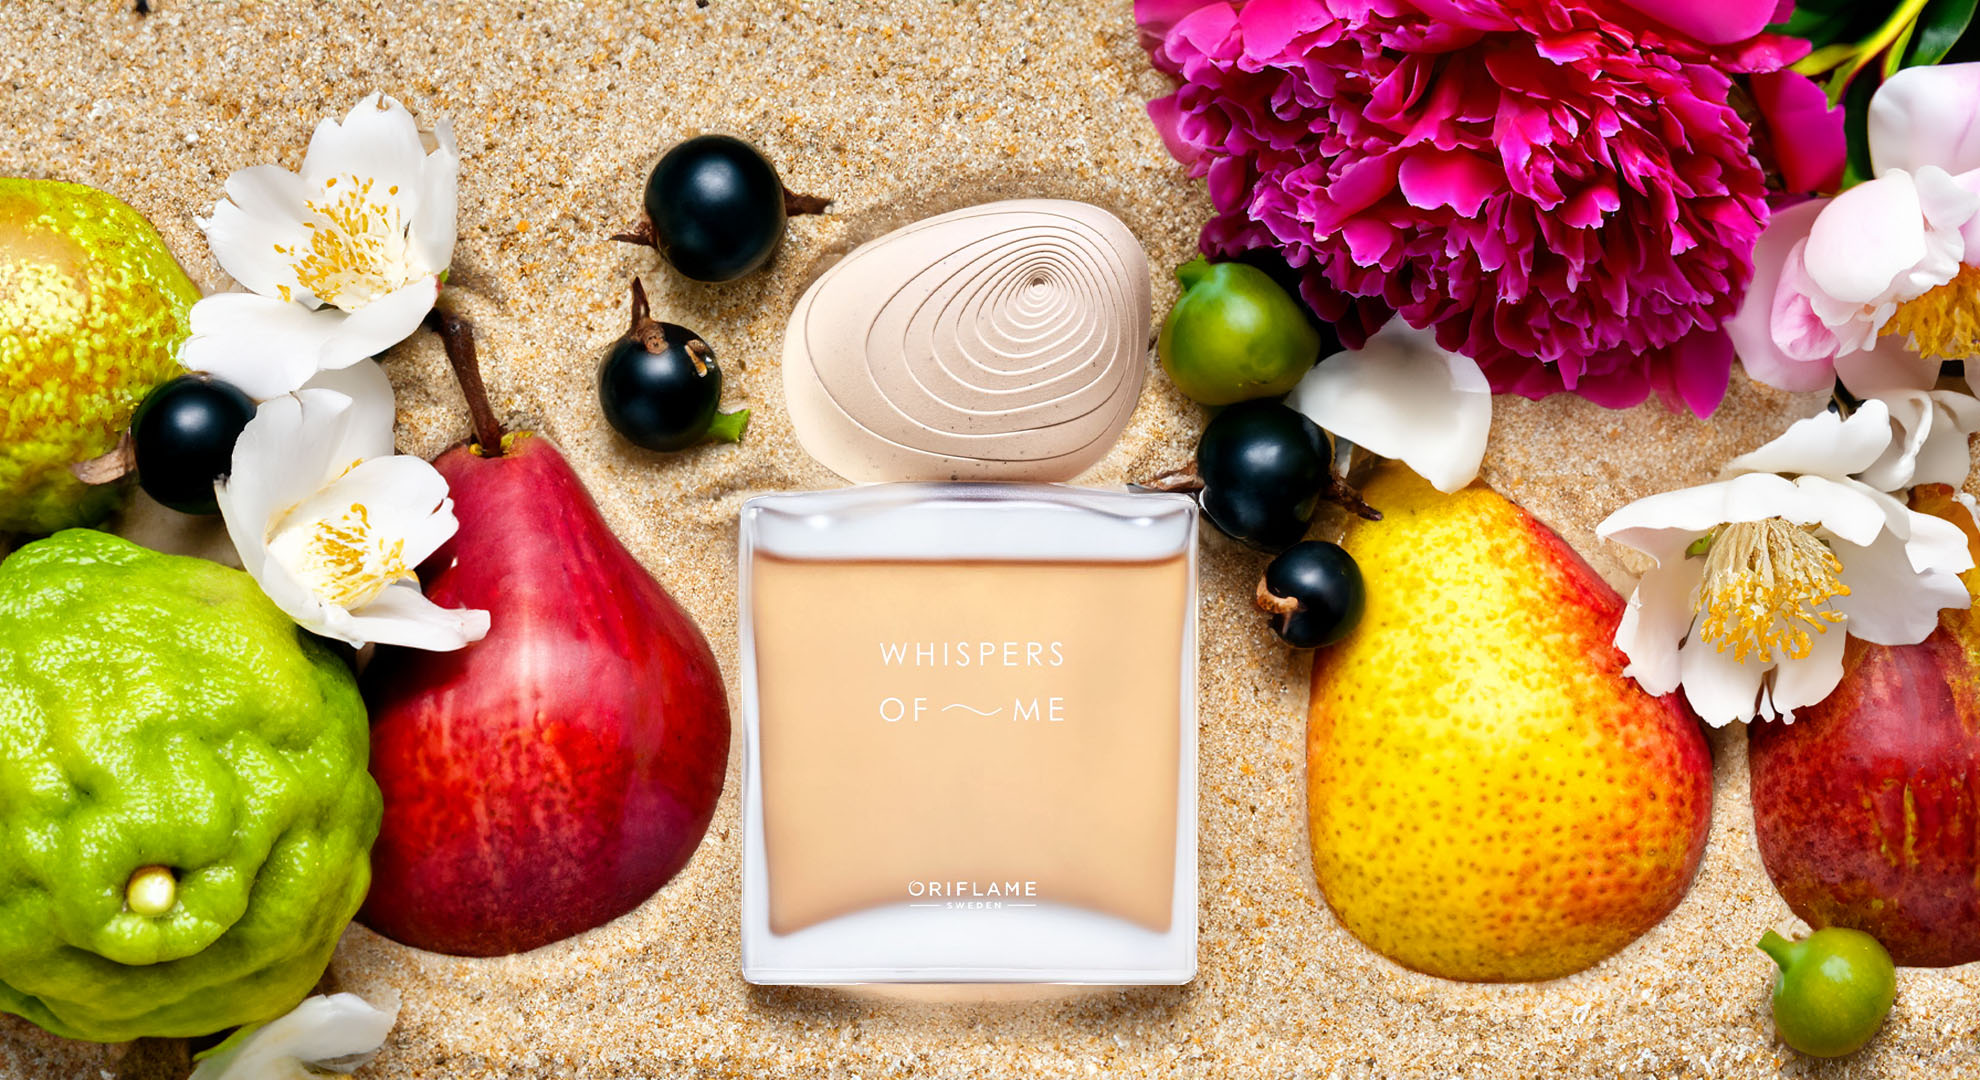 whispers of mystery: oriflame's whispers of me an olfactory wo